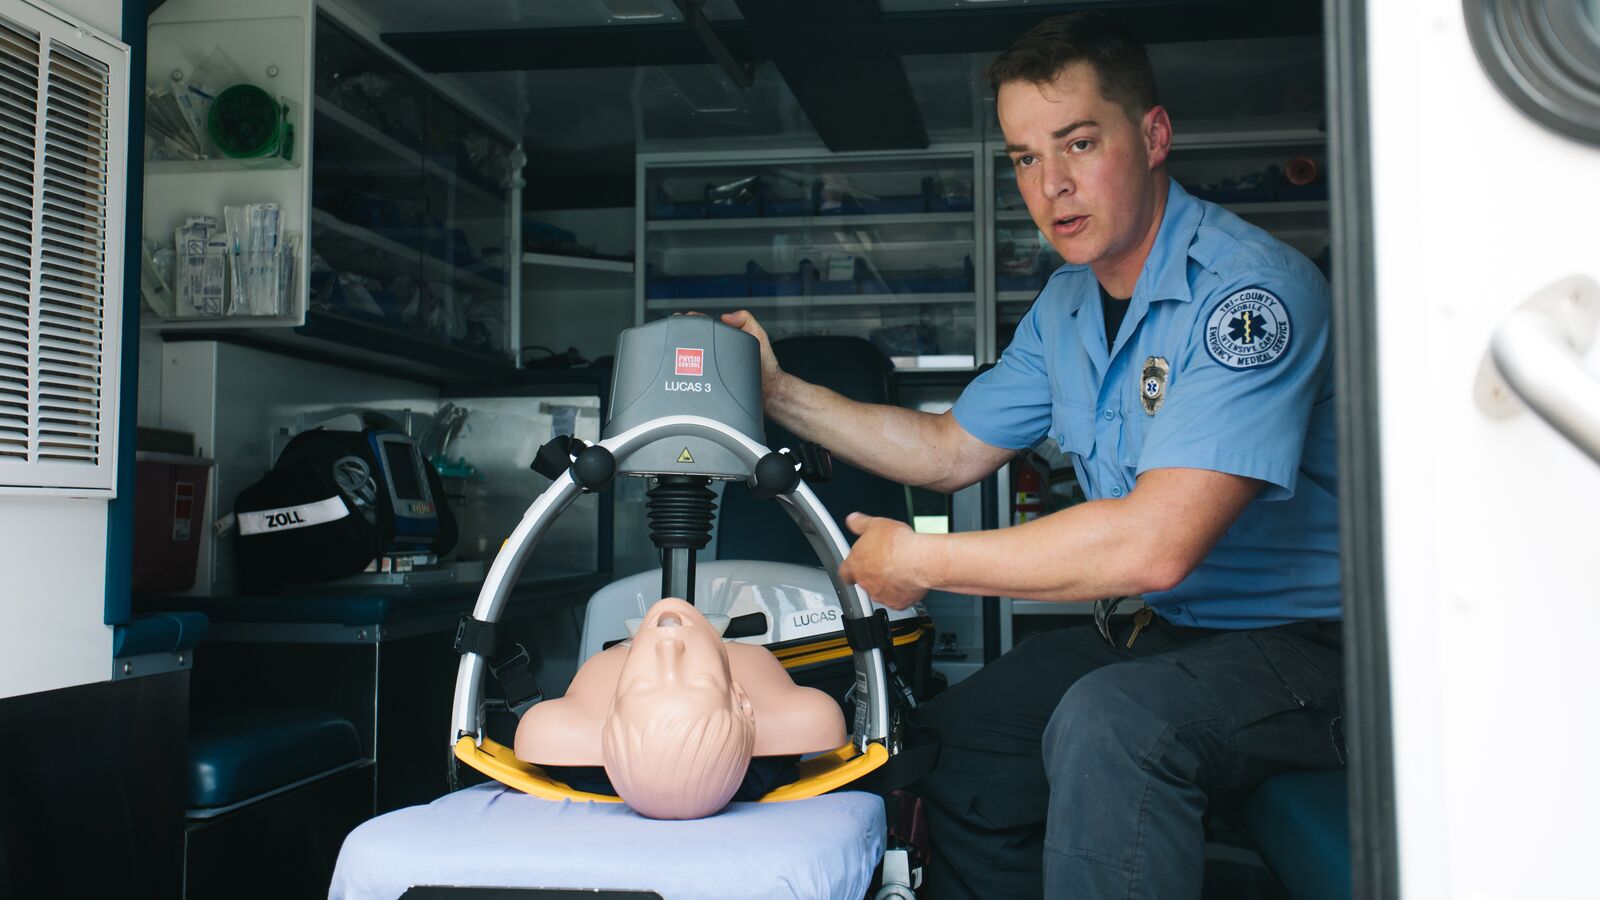 An emergency responder with Tri-County EMS demonstrates the CPR machine outfitting this ambulance.